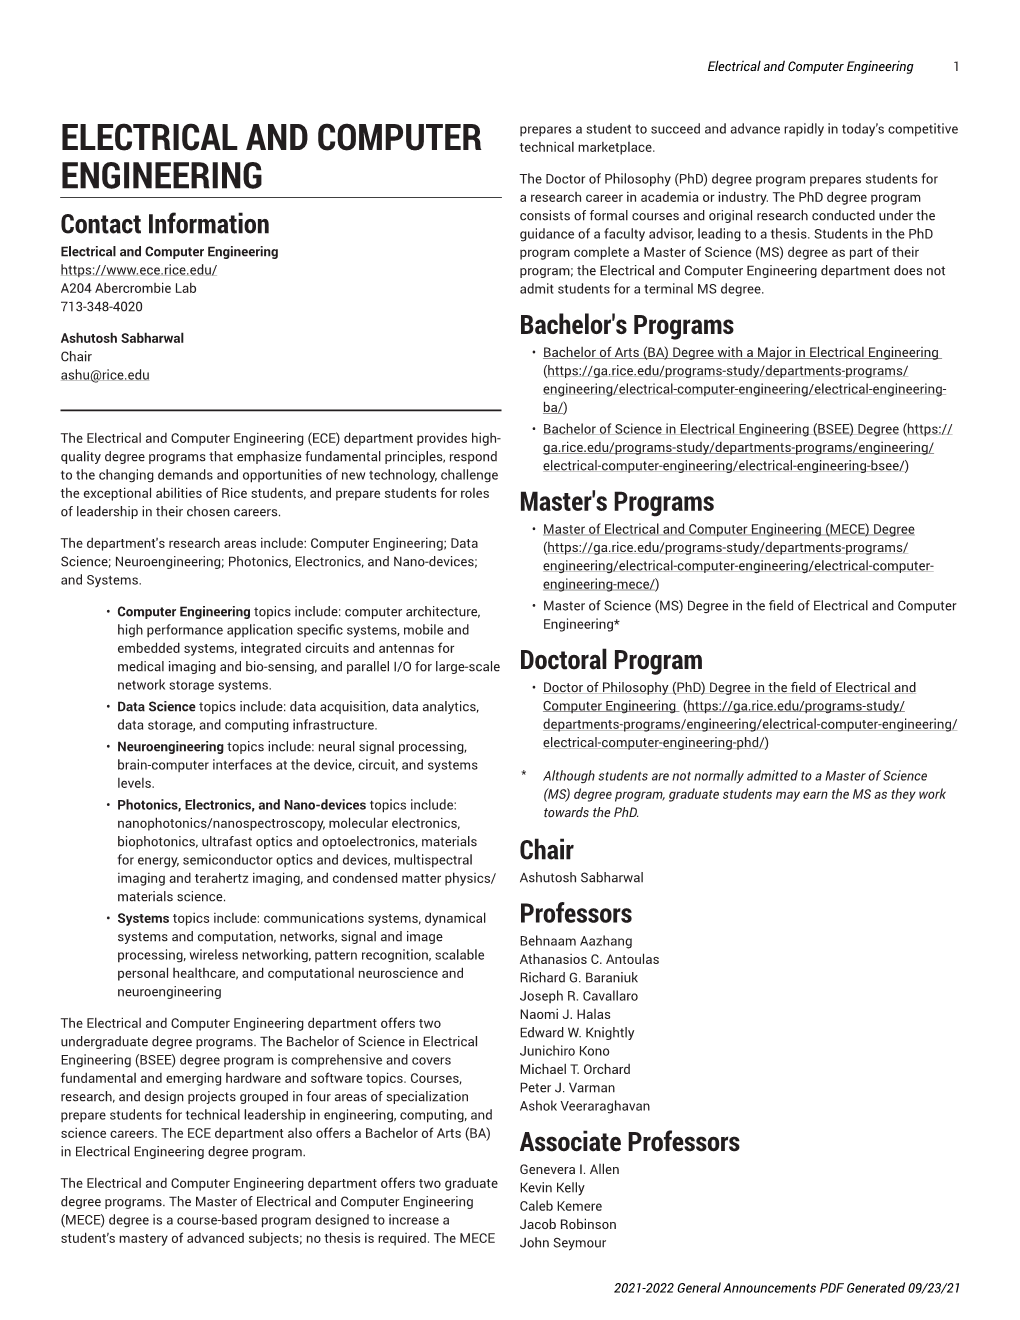 Electrical-Computer-Engineering.Pdf